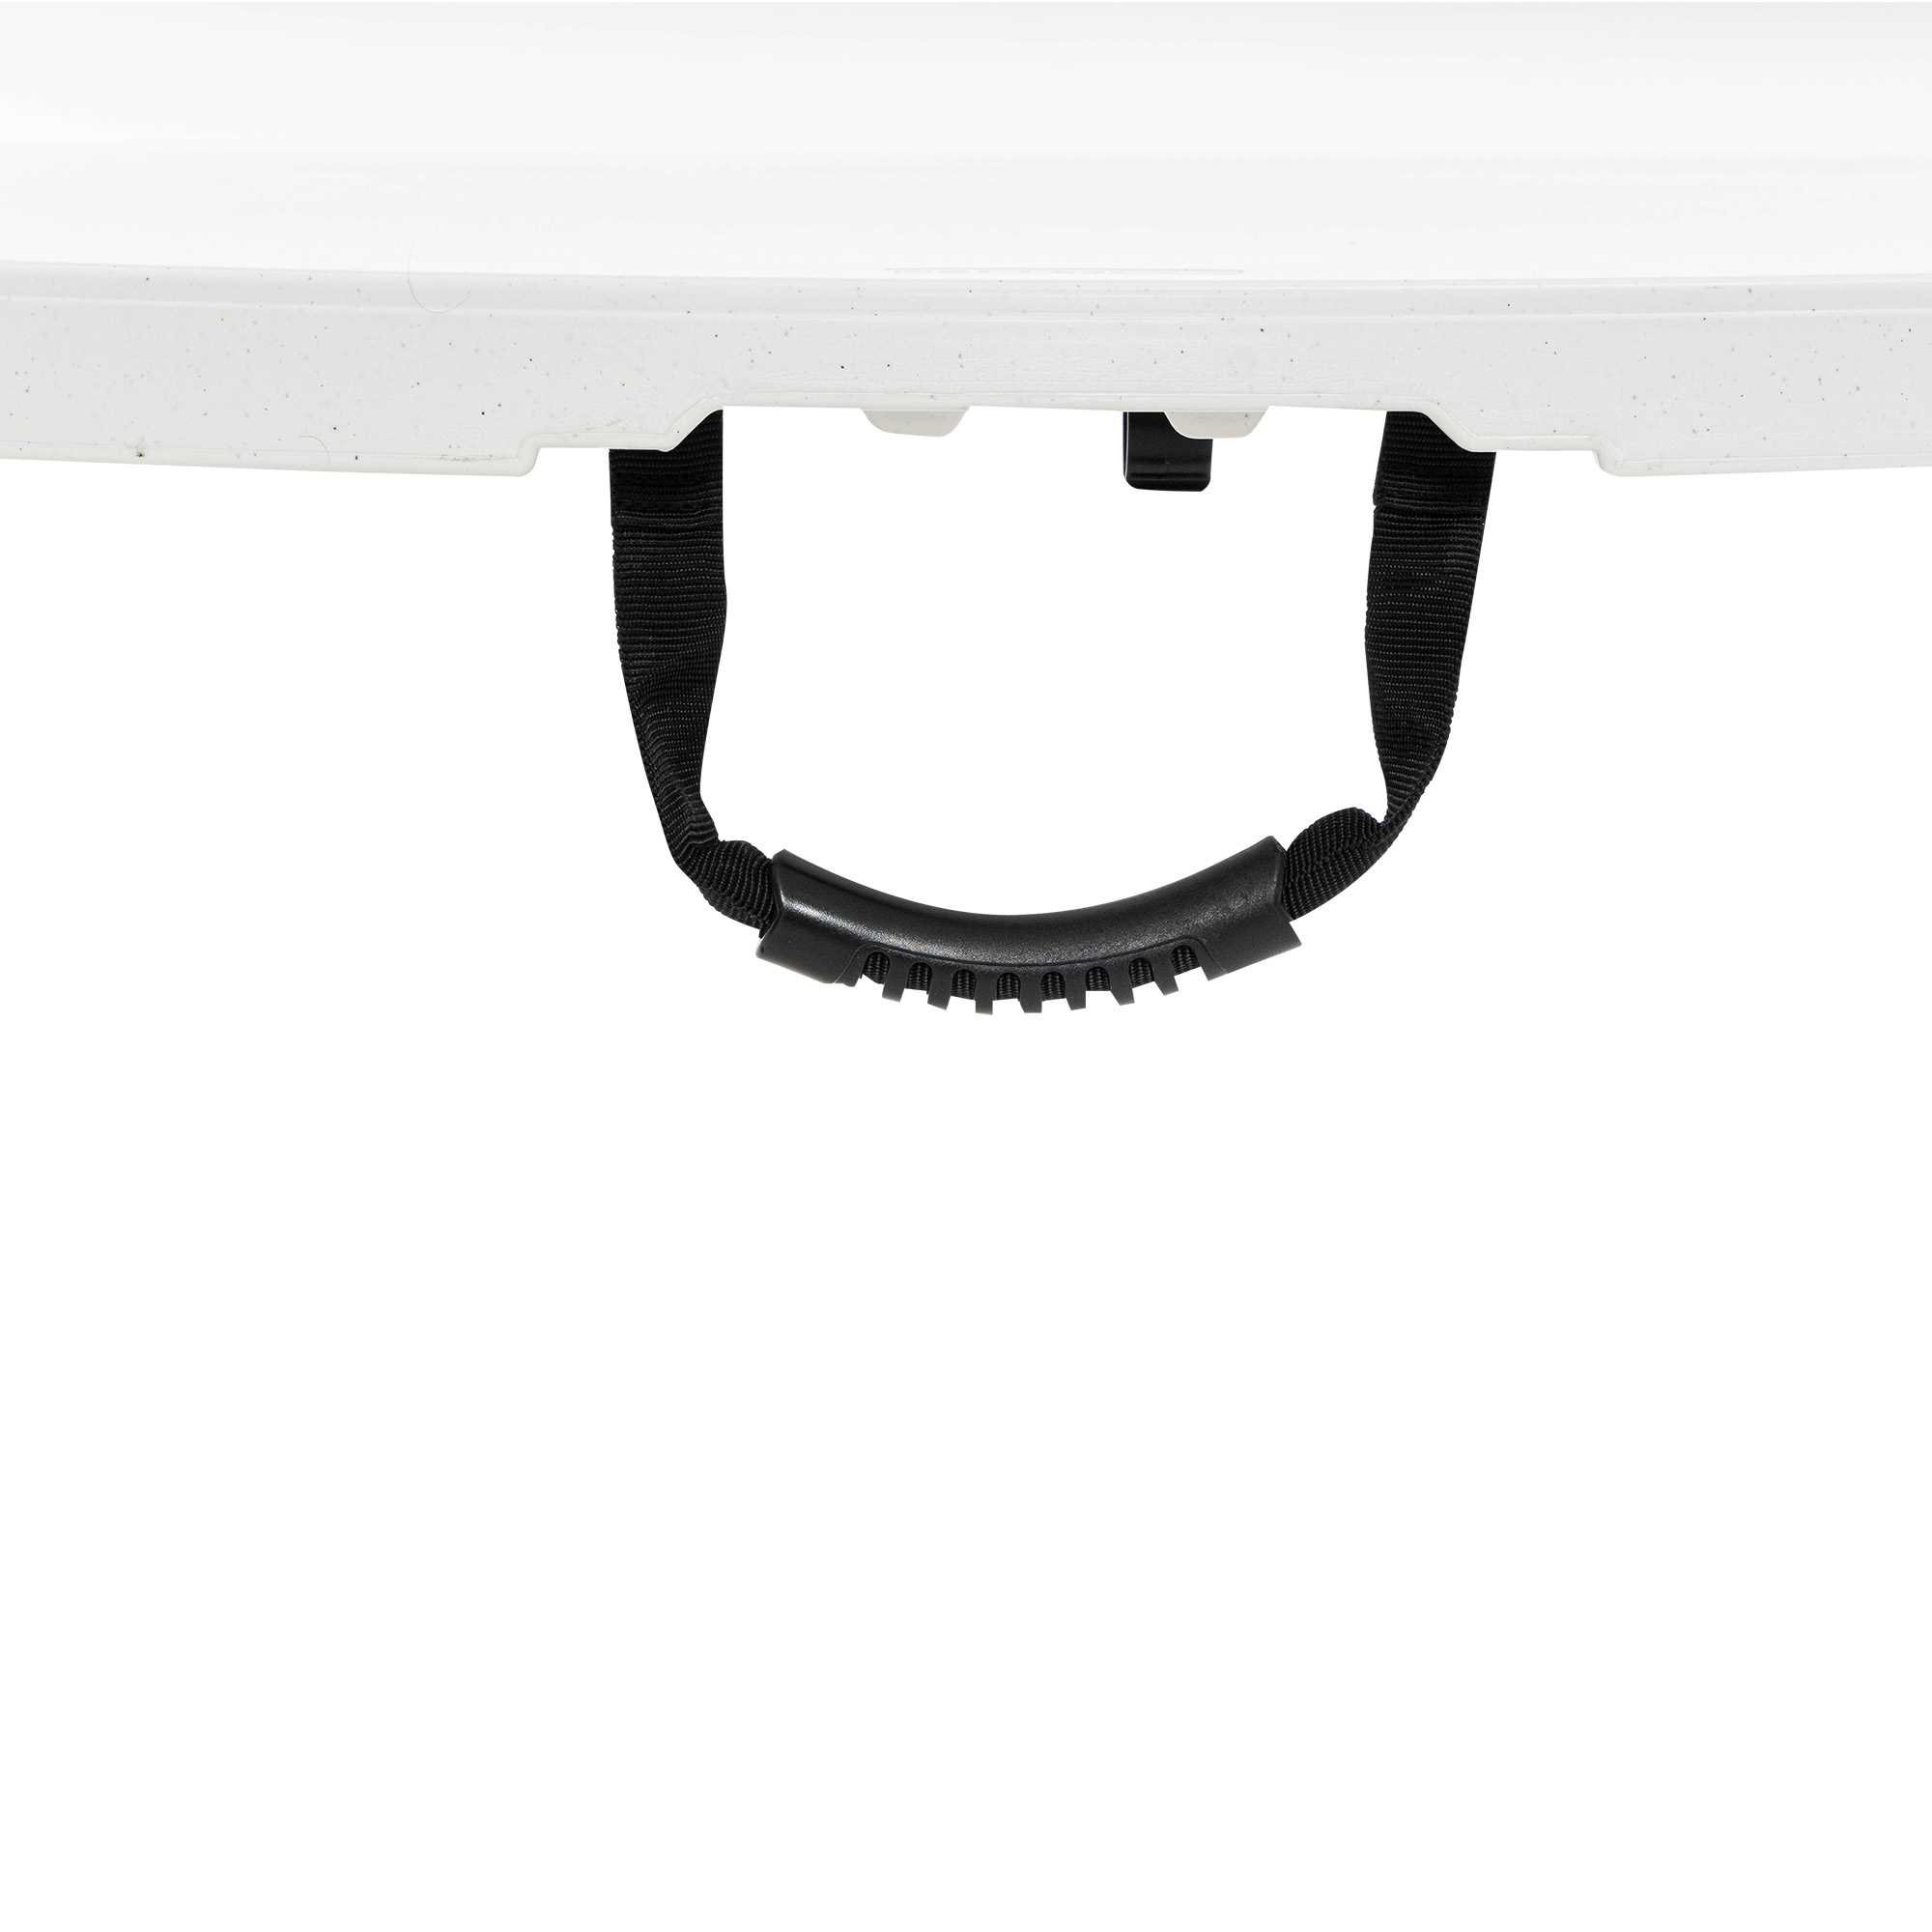 48-inch Round FIH folding table 122cm Dia / 4-6 people / light commercial